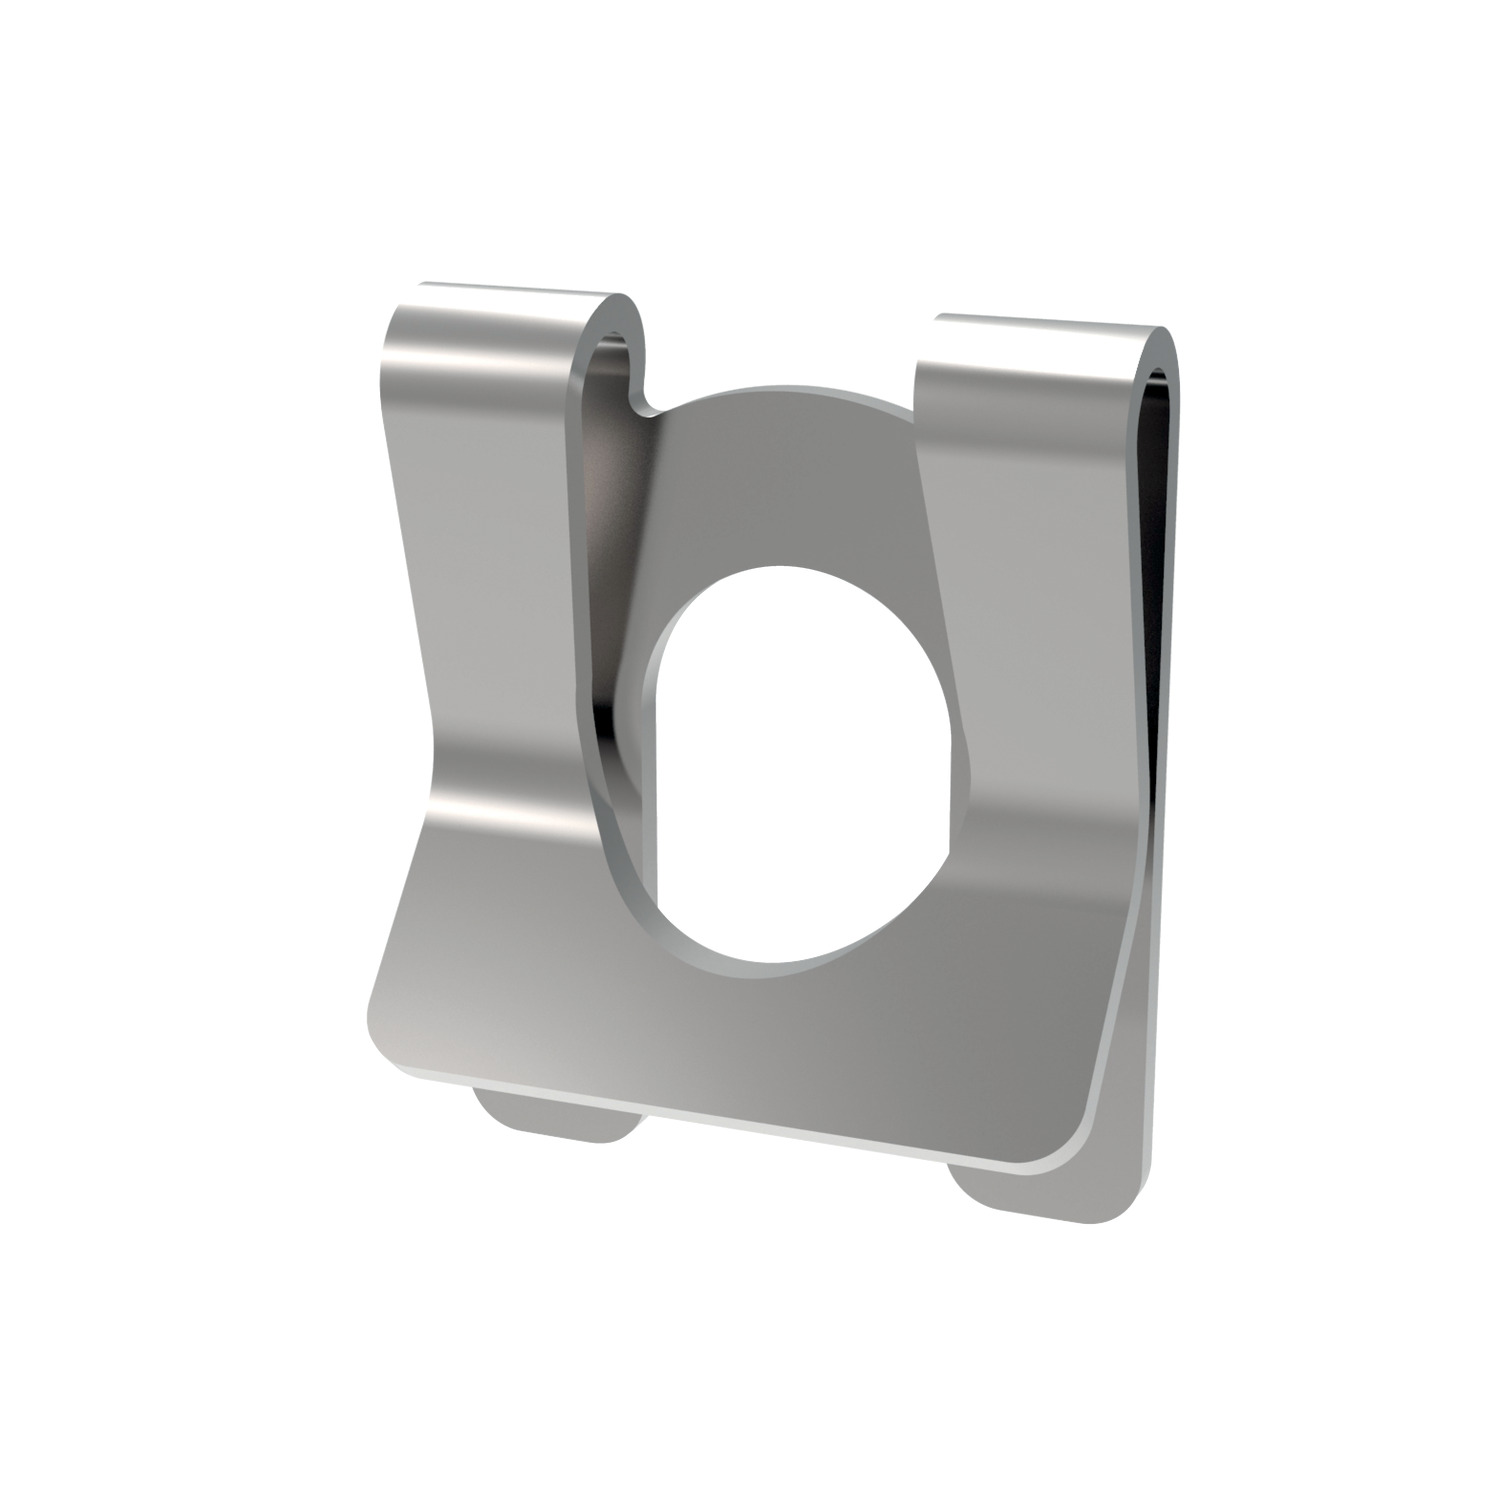 Product 65680, Safety Fastener (SLM) silver zinc plated / 